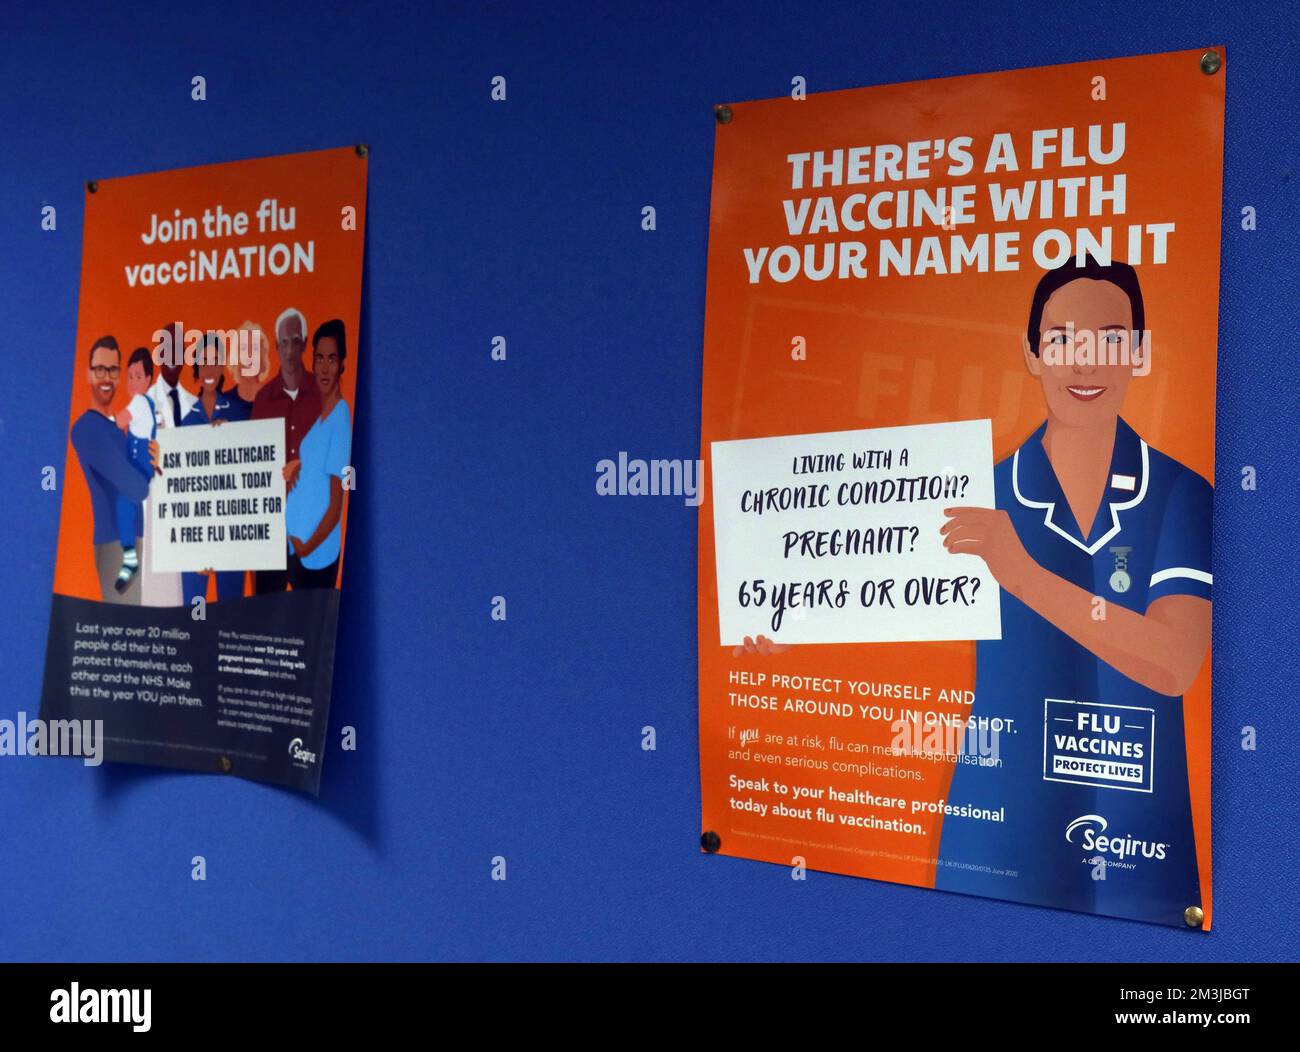 Join the flu vacciNATION, Theres a flu vaccine , with your name on it, poster, from Seqirus CSL, in doctors surgery Stock Photo